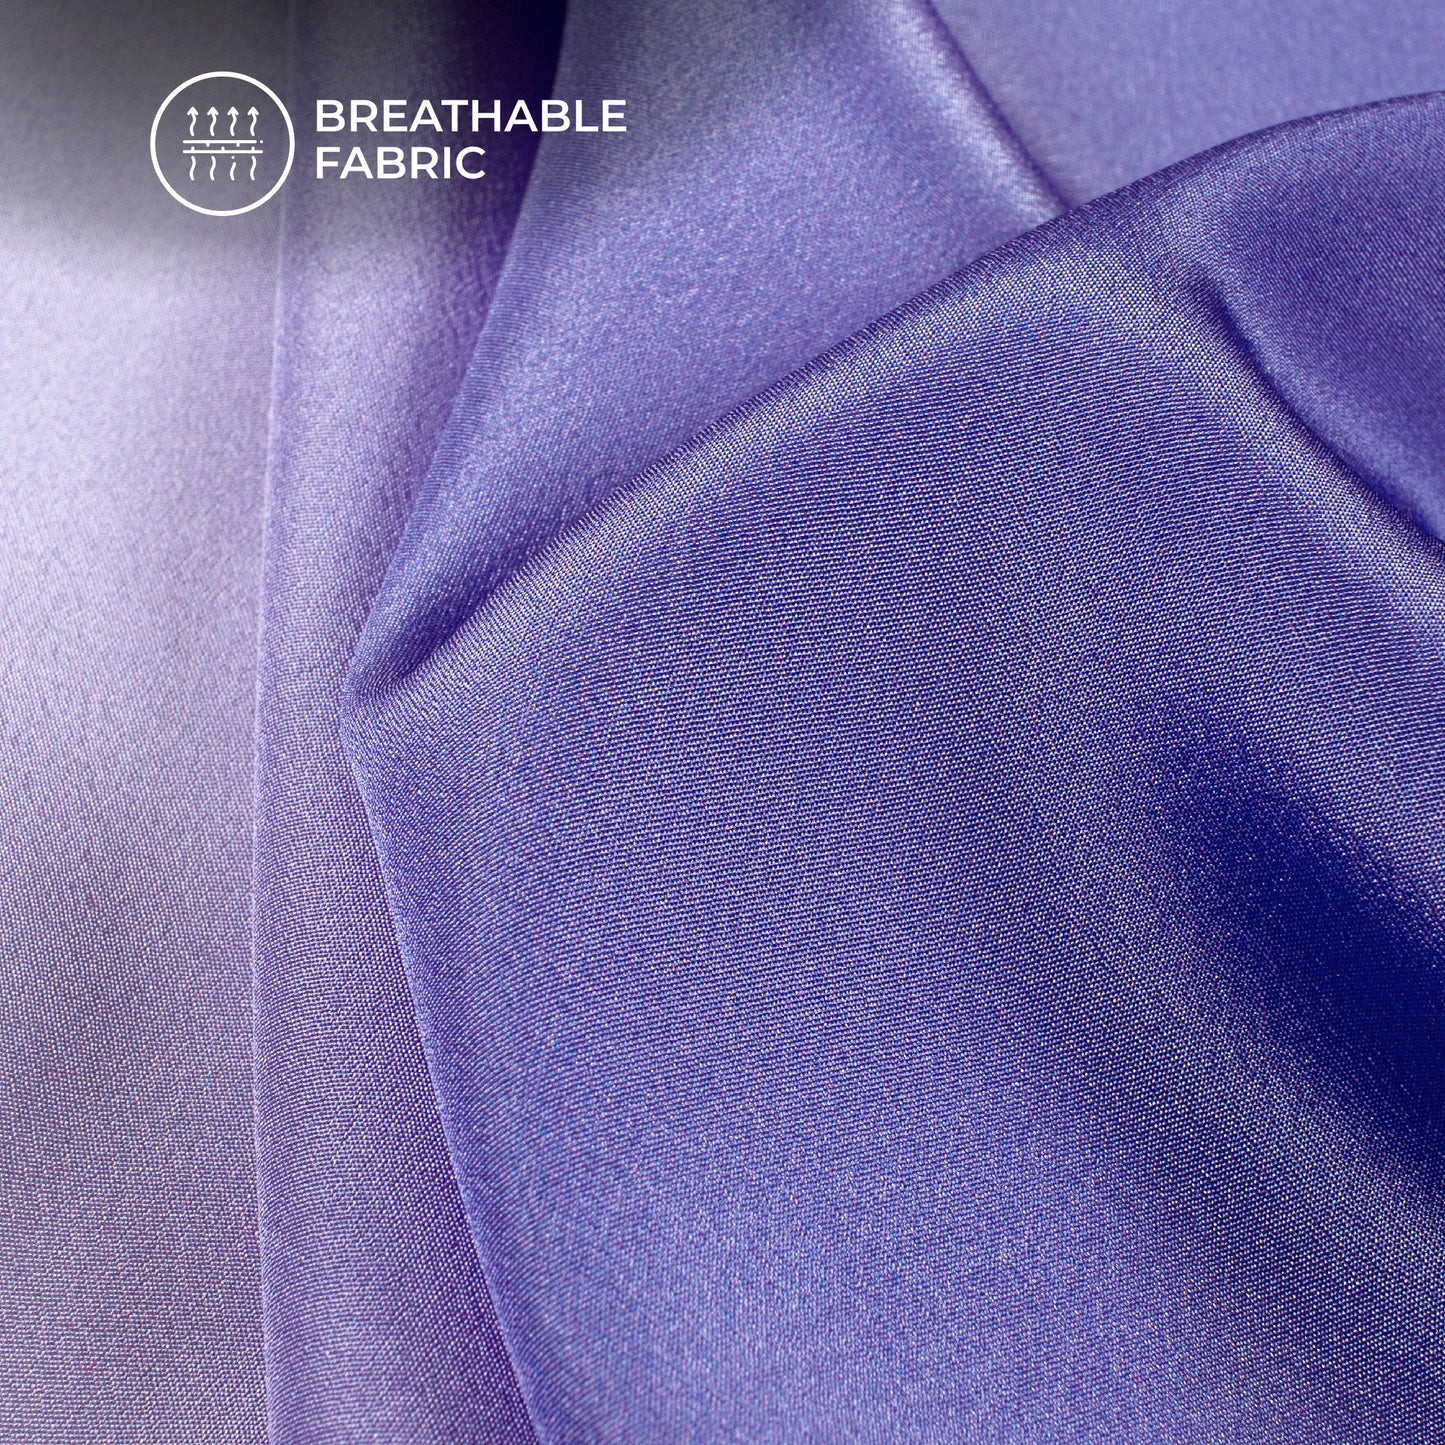 Aetherial Charm: Attrective Ombre Digital Print Crepe Silk Fabric